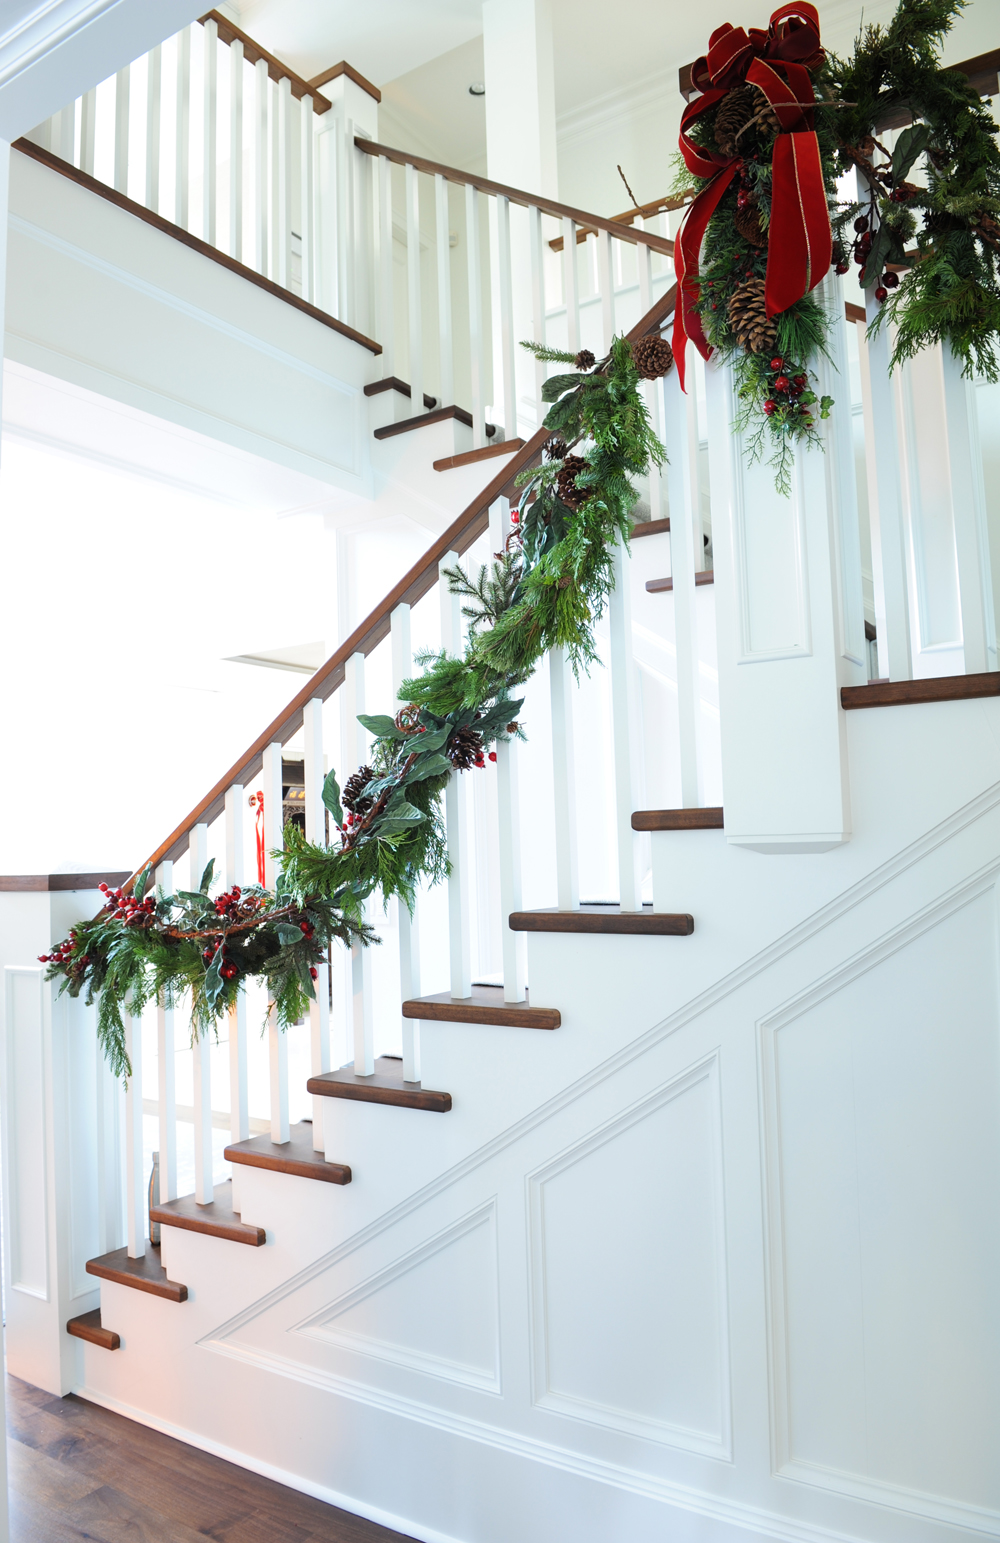 Traditional staircare with banister wrapped in garland